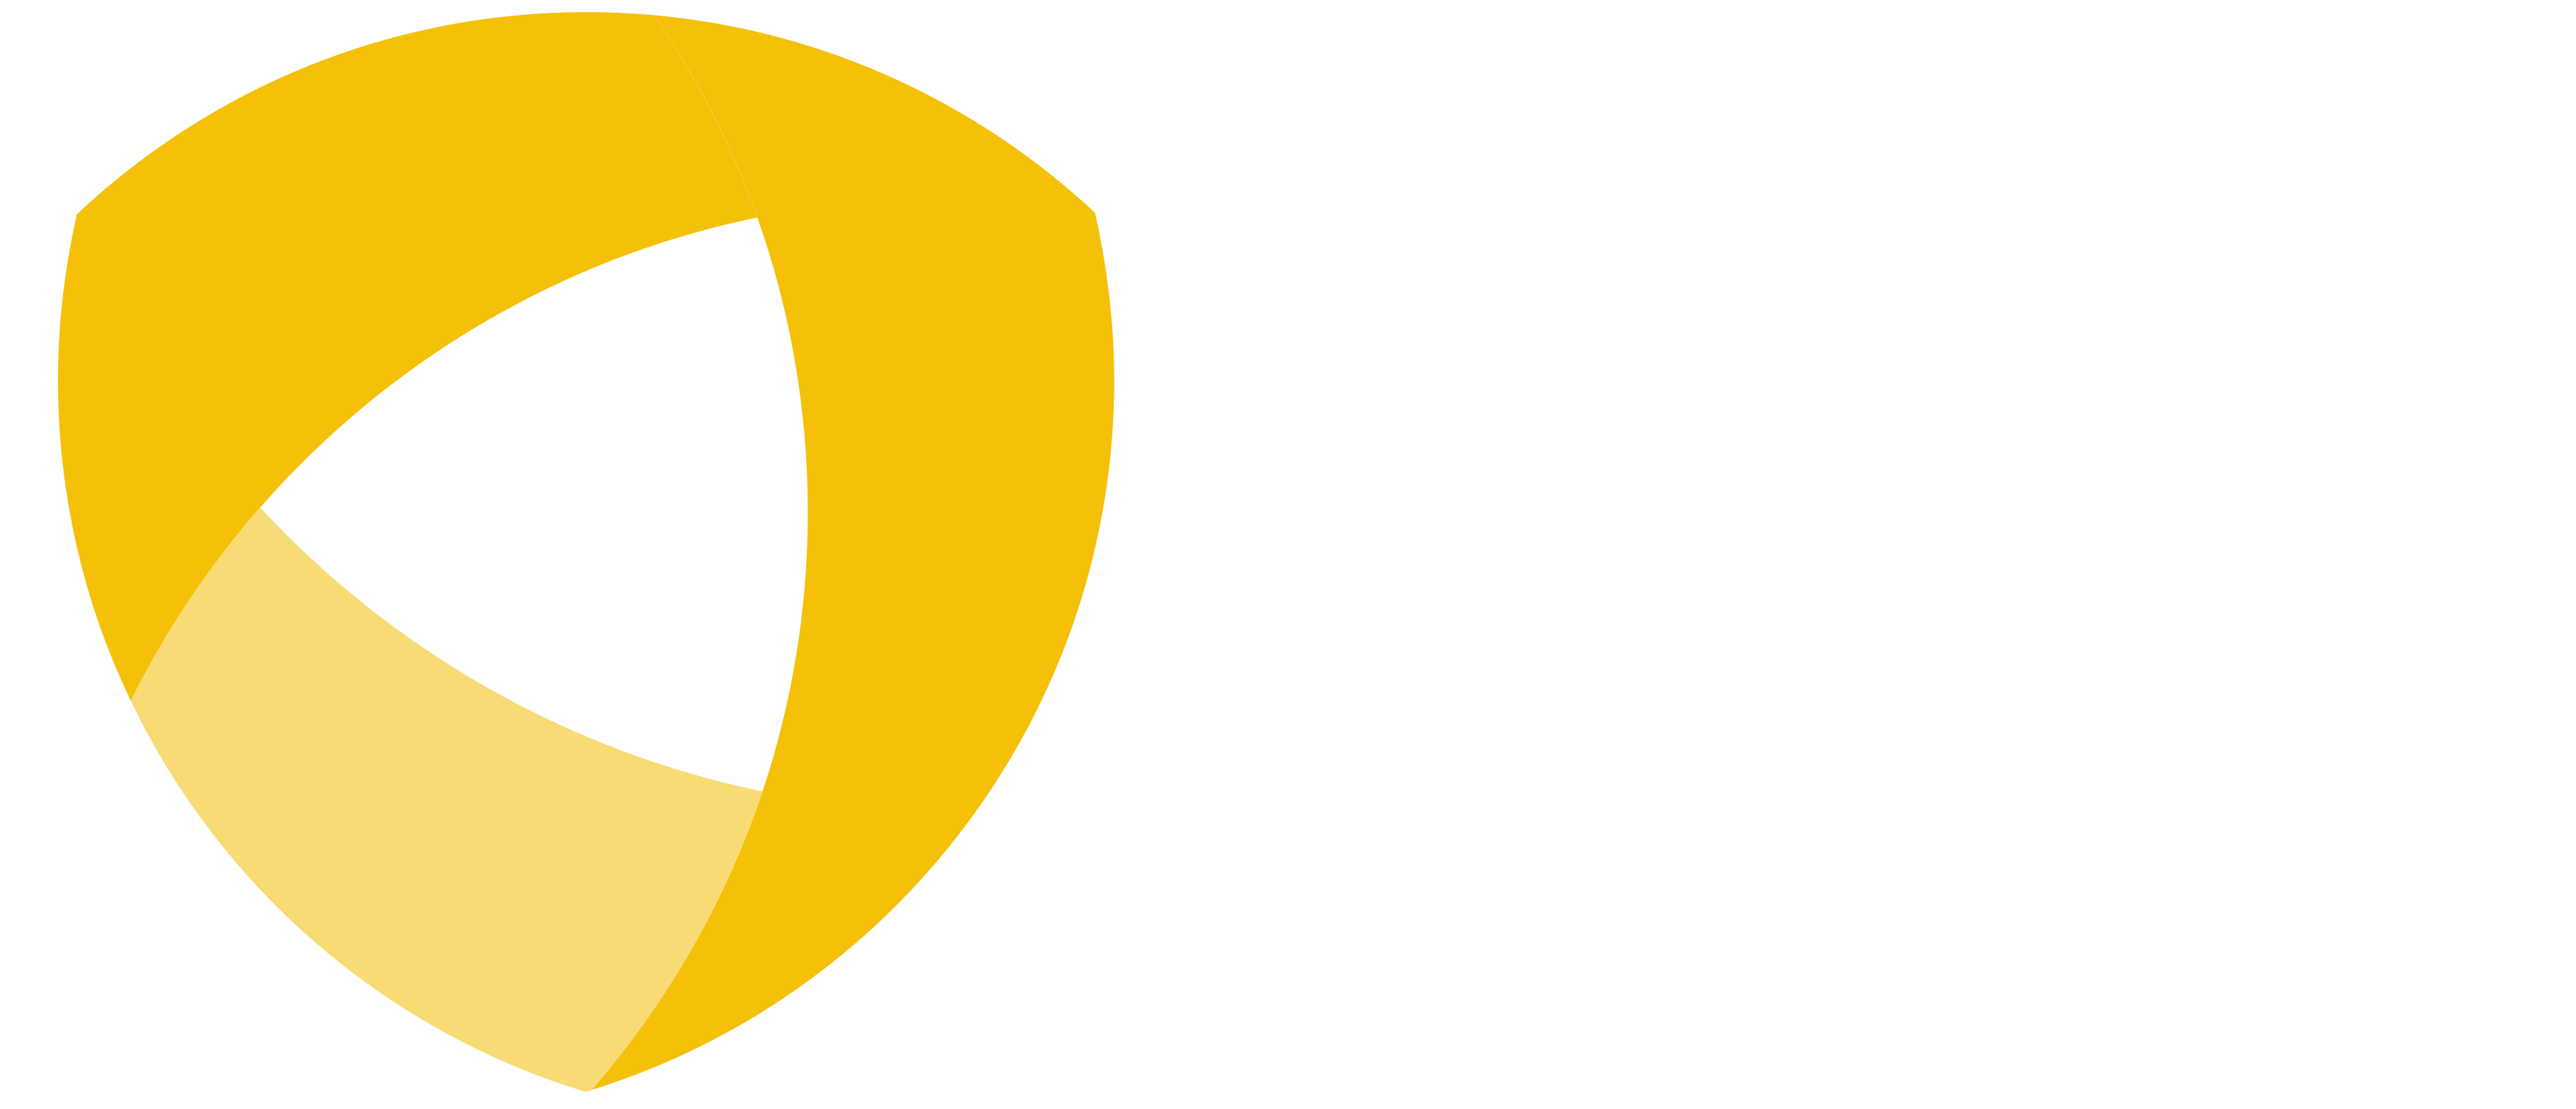 Posly